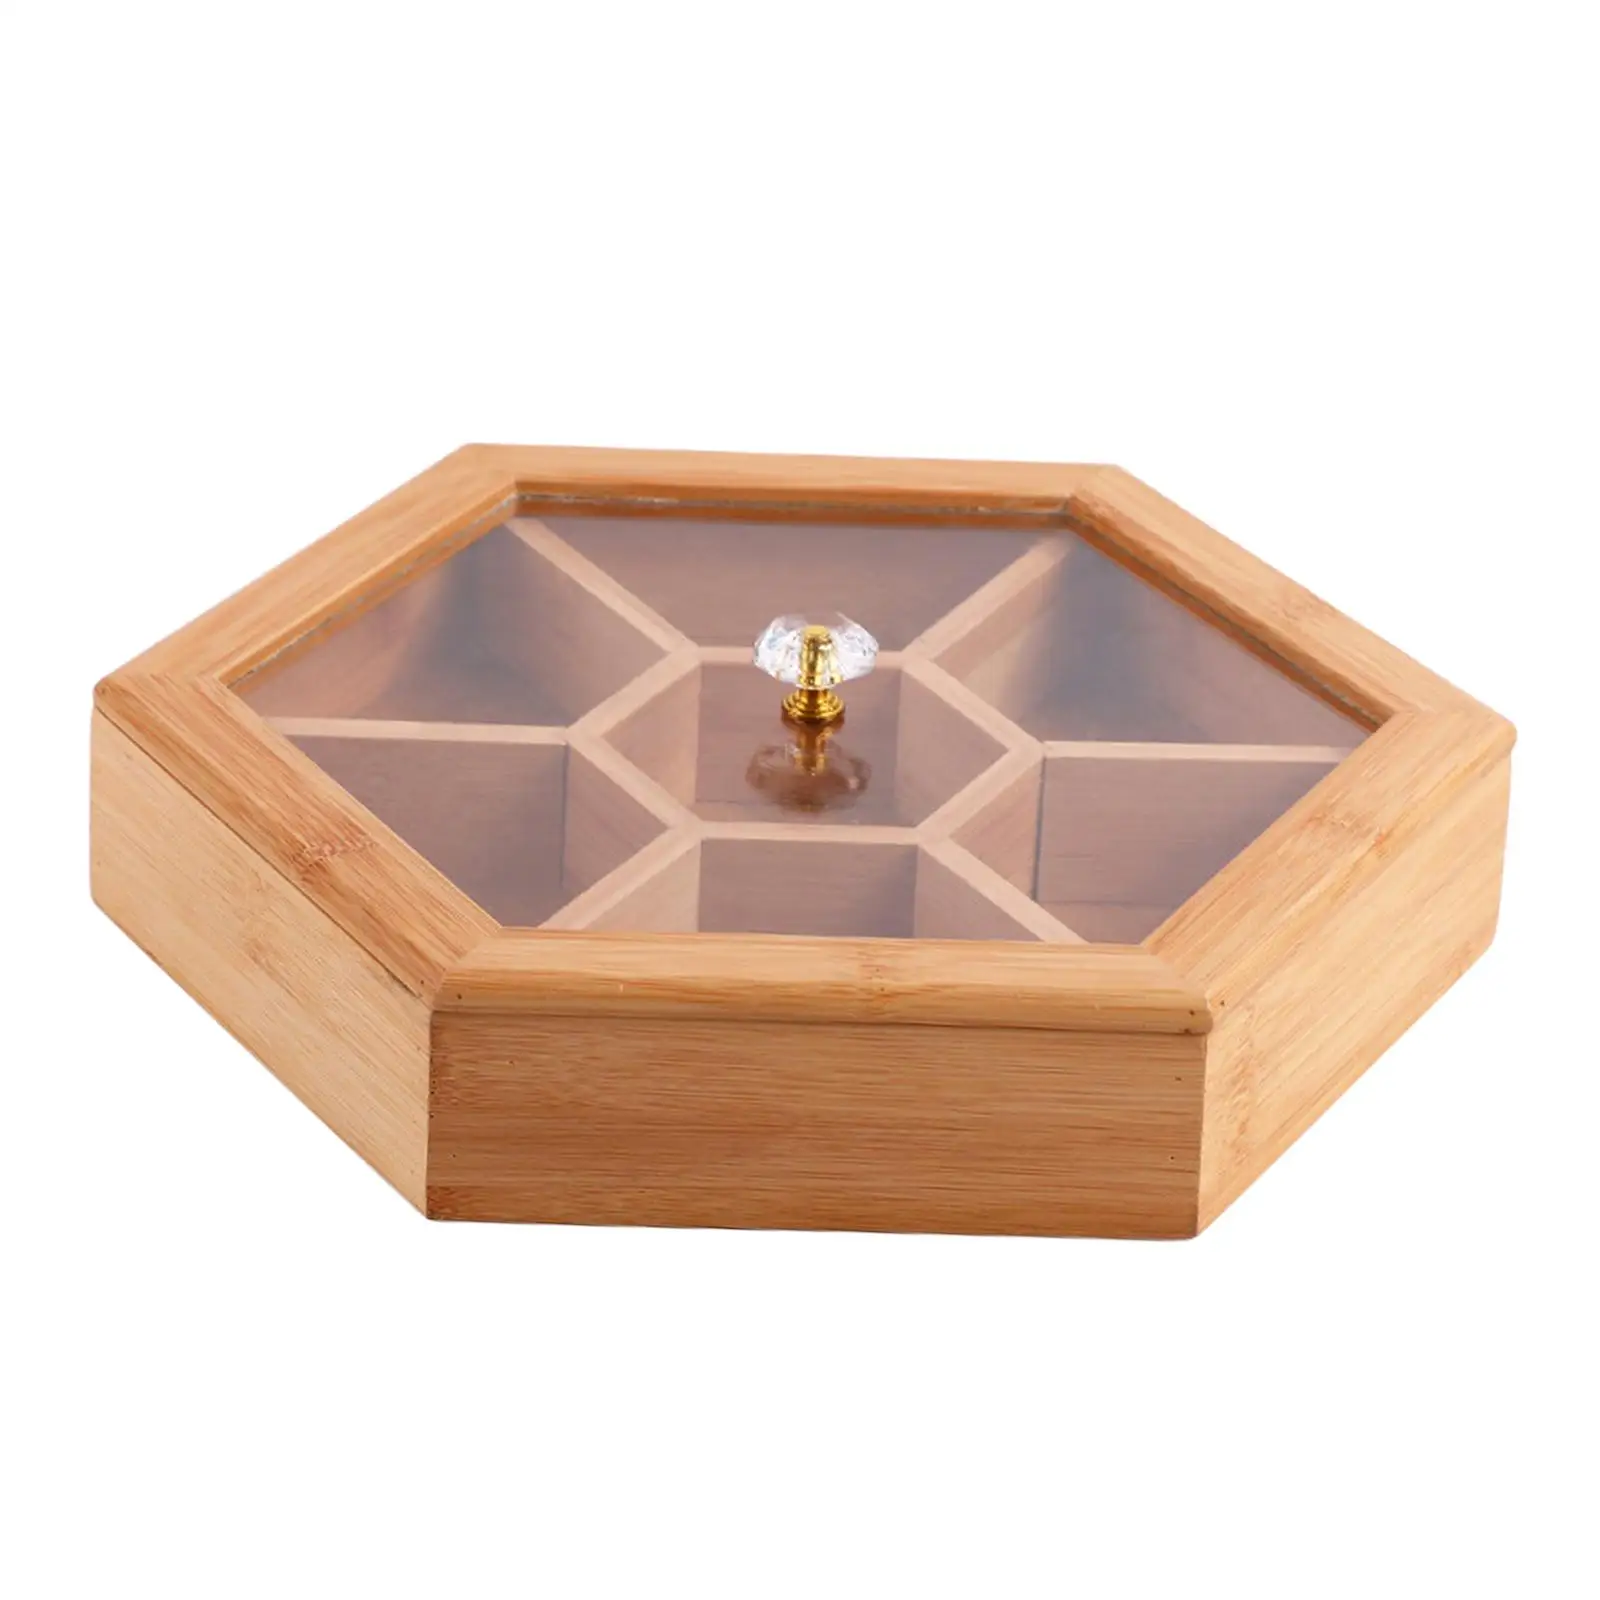 Dried Fruit Box 7 Compartment Food Storage Case Wood Portable Durable Snack Nut Tray Sectional Serving Tray for Home Centerpiece